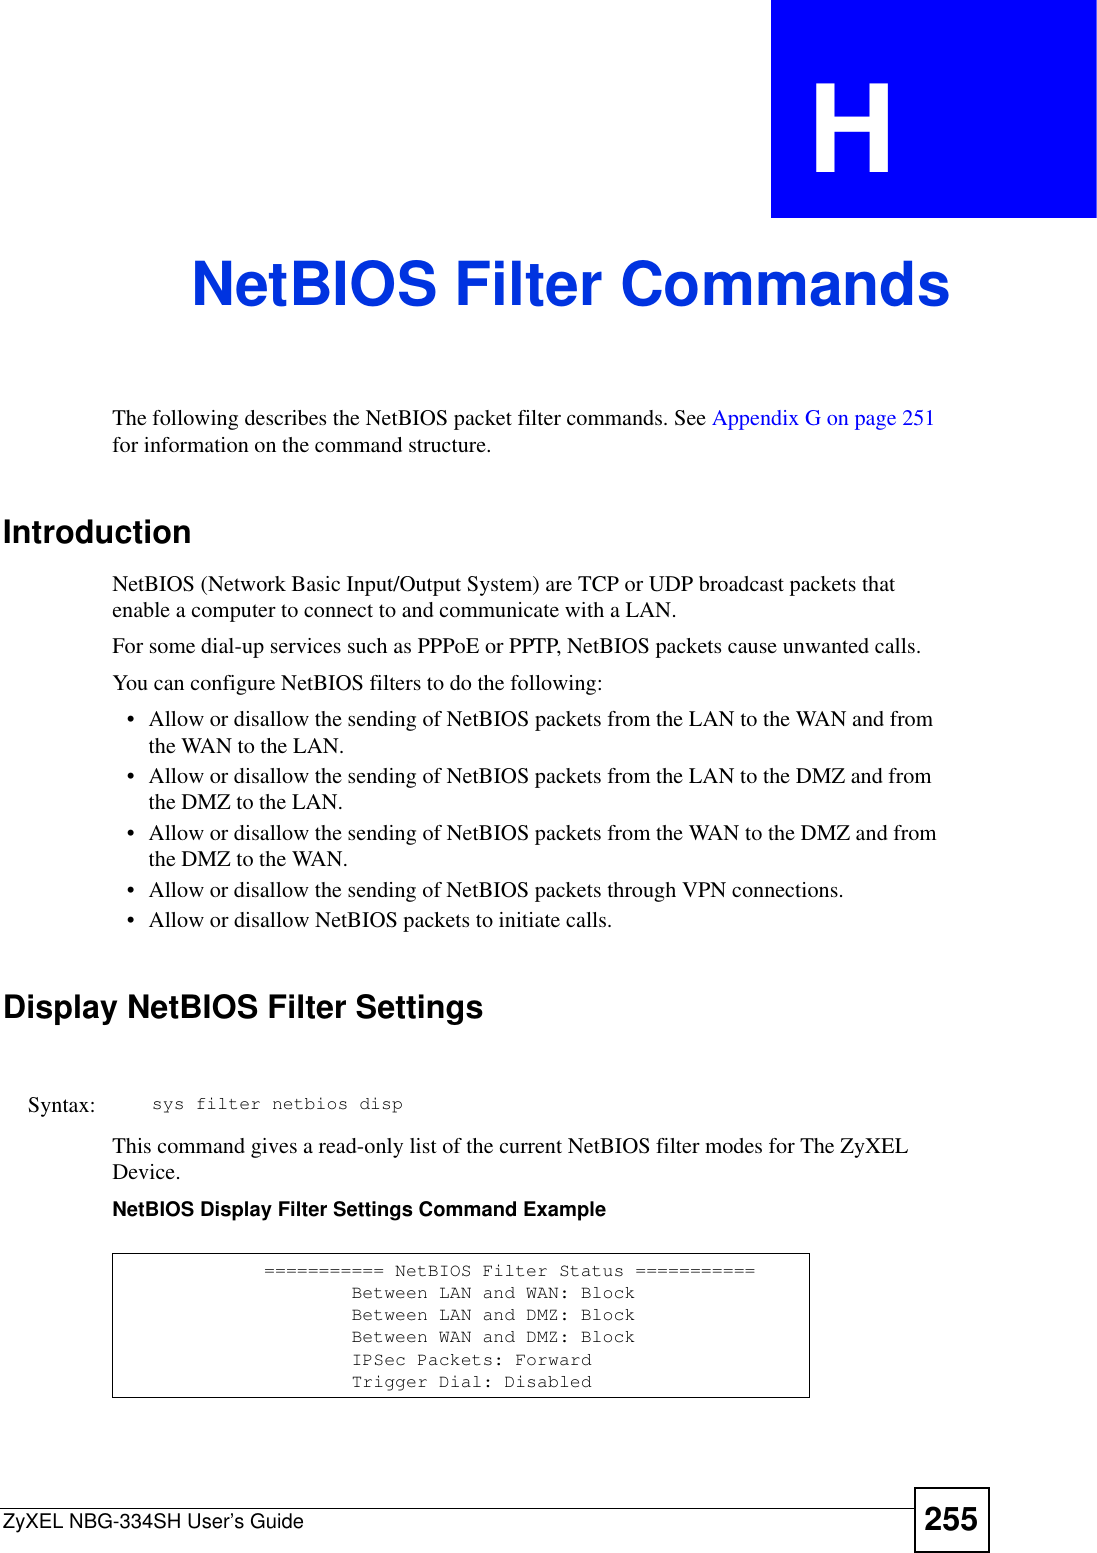 ZyXEL NBG-334SH User’s Guide 255APPENDIX  H NetBIOS Filter CommandsThe following describes the NetBIOS packet filter commands. See Appendix G on page 251for information on the command structure. IntroductionNetBIOS (Network Basic Input/Output System) are TCP or UDP broadcast packets that enable a computer to connect to and communicate with a LAN. For some dial-up services such as PPPoE or PPTP, NetBIOS packets cause unwanted calls.You can configure NetBIOS filters to do the following:• Allow or disallow the sending of NetBIOS packets from the LAN to the WAN and from the WAN to the LAN.• Allow or disallow the sending of NetBIOS packets from the LAN to the DMZ and from the DMZ to the LAN.• Allow or disallow the sending of NetBIOS packets from the WAN to the DMZ and from the DMZ to the WAN.• Allow or disallow the sending of NetBIOS packets through VPN connections.• Allow or disallow NetBIOS packets to initiate calls.Display NetBIOS Filter SettingsThis command gives a read-only list of the current NetBIOS filter modes for The ZyXEL Device.NetBIOS Display Filter Settings Command ExampleSyntax: sys filter netbios disp=========== NetBIOS Filter Status ===========        Between LAN and WAN: Block        Between LAN and DMZ: Block        Between WAN and DMZ: Block        IPSec Packets: Forward        Trigger Dial: Disabled